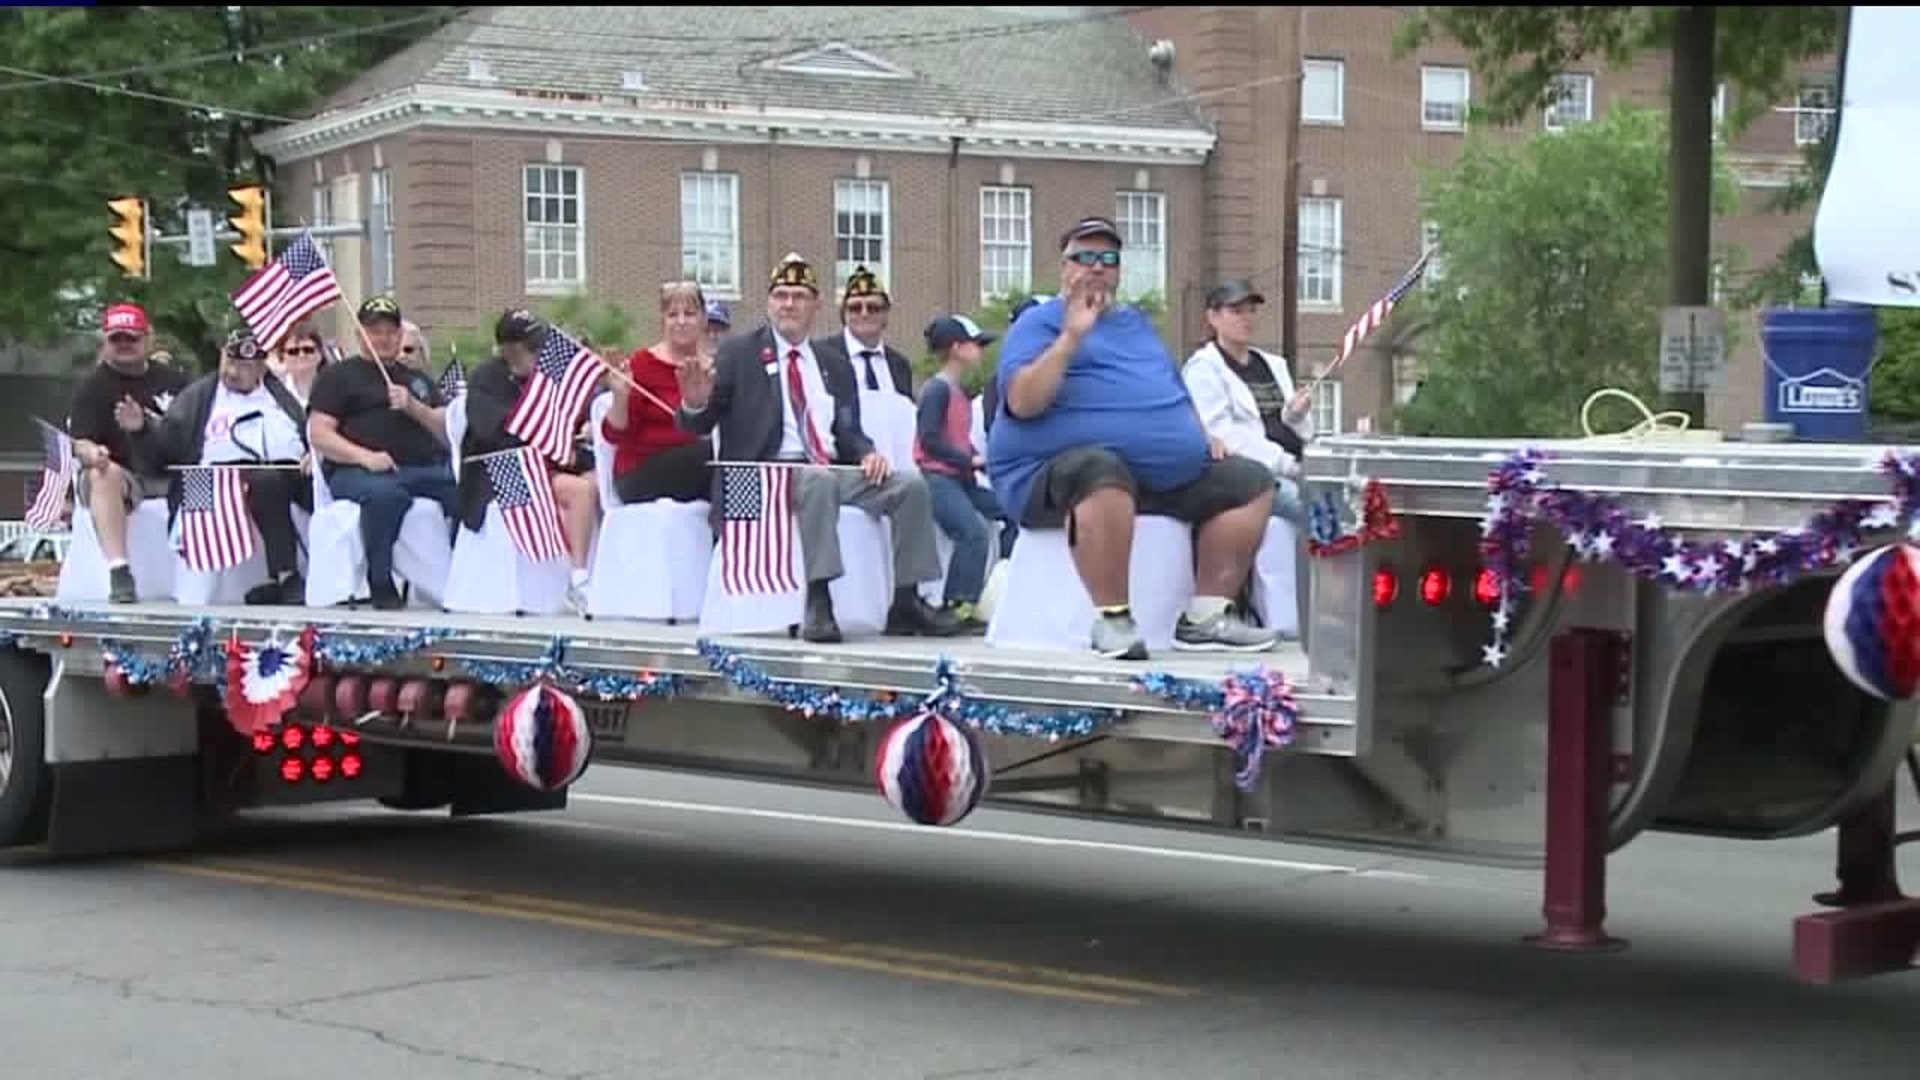 Show of Patriotism at Parade in Luzerne County